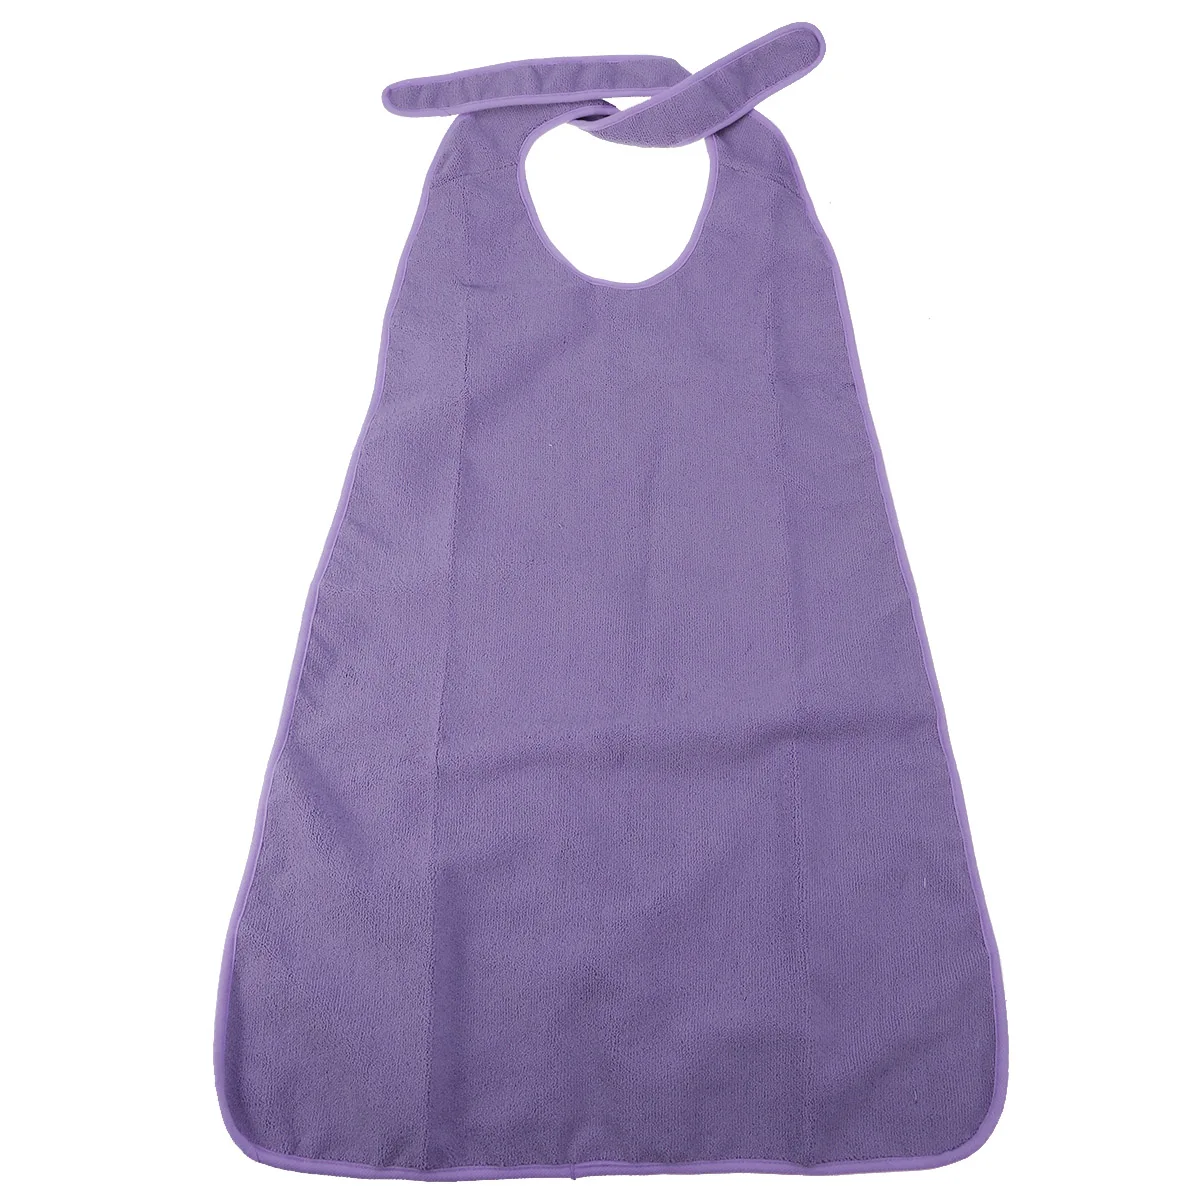 Dining Clothing For Elderly Washable Protector Aid Apron Mealtime Bib Reusable 